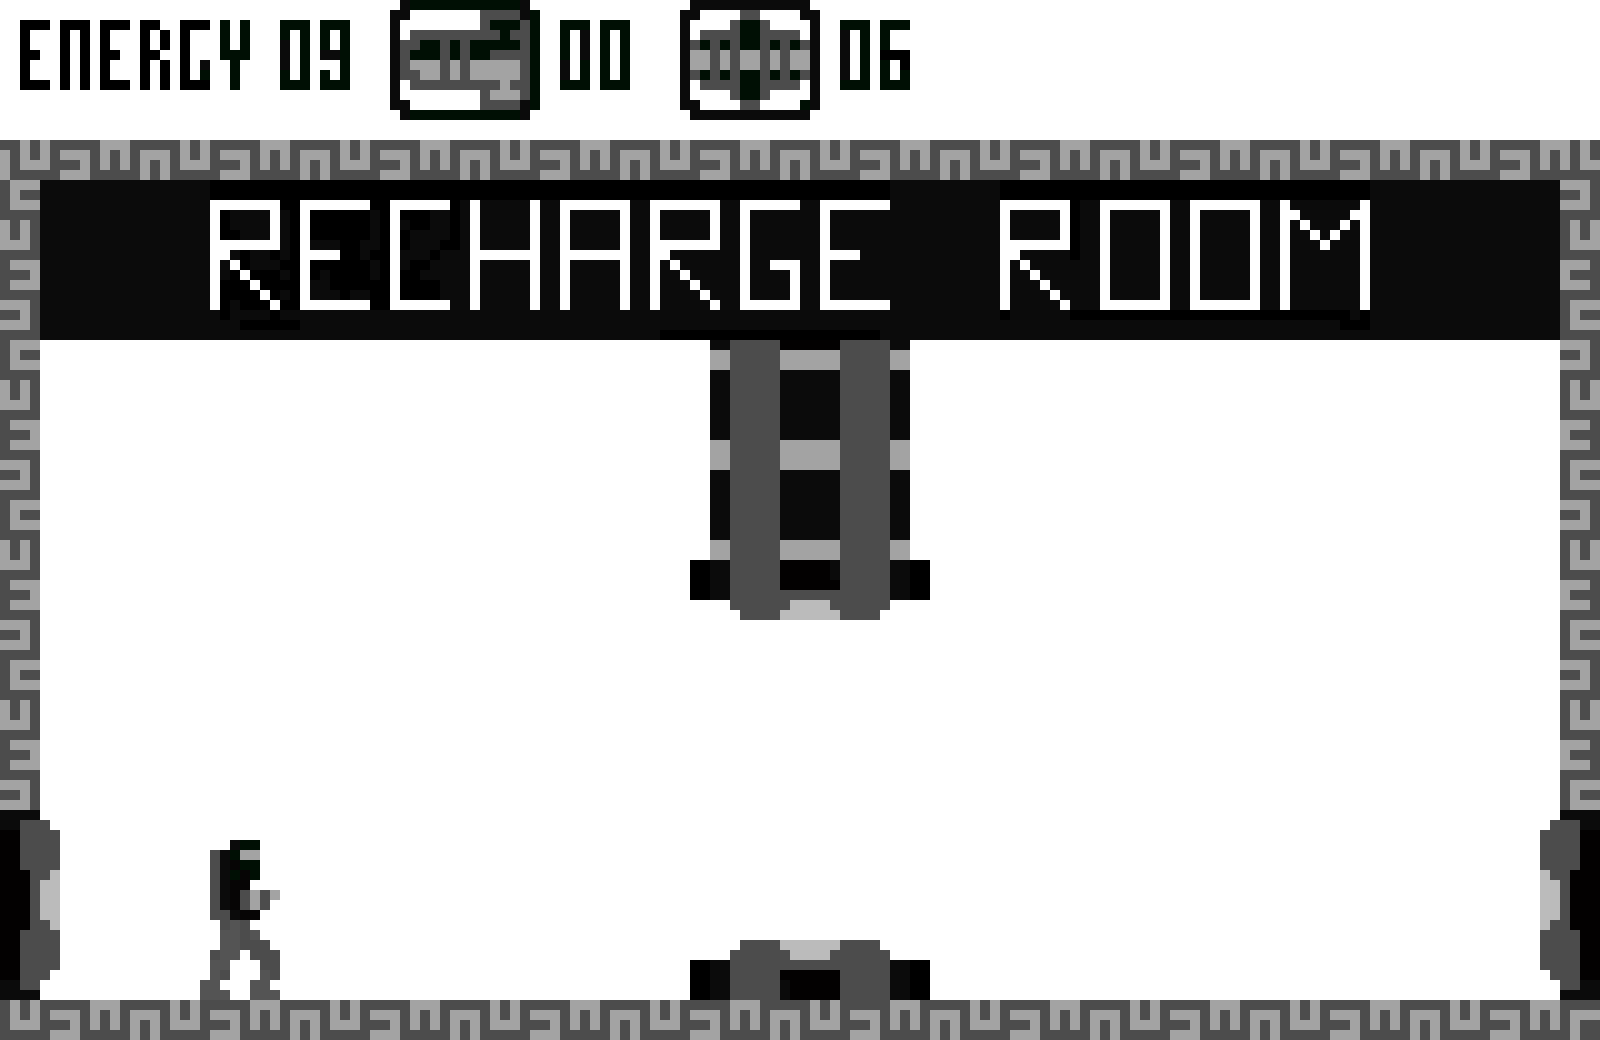 Rest in the Recharge Room.